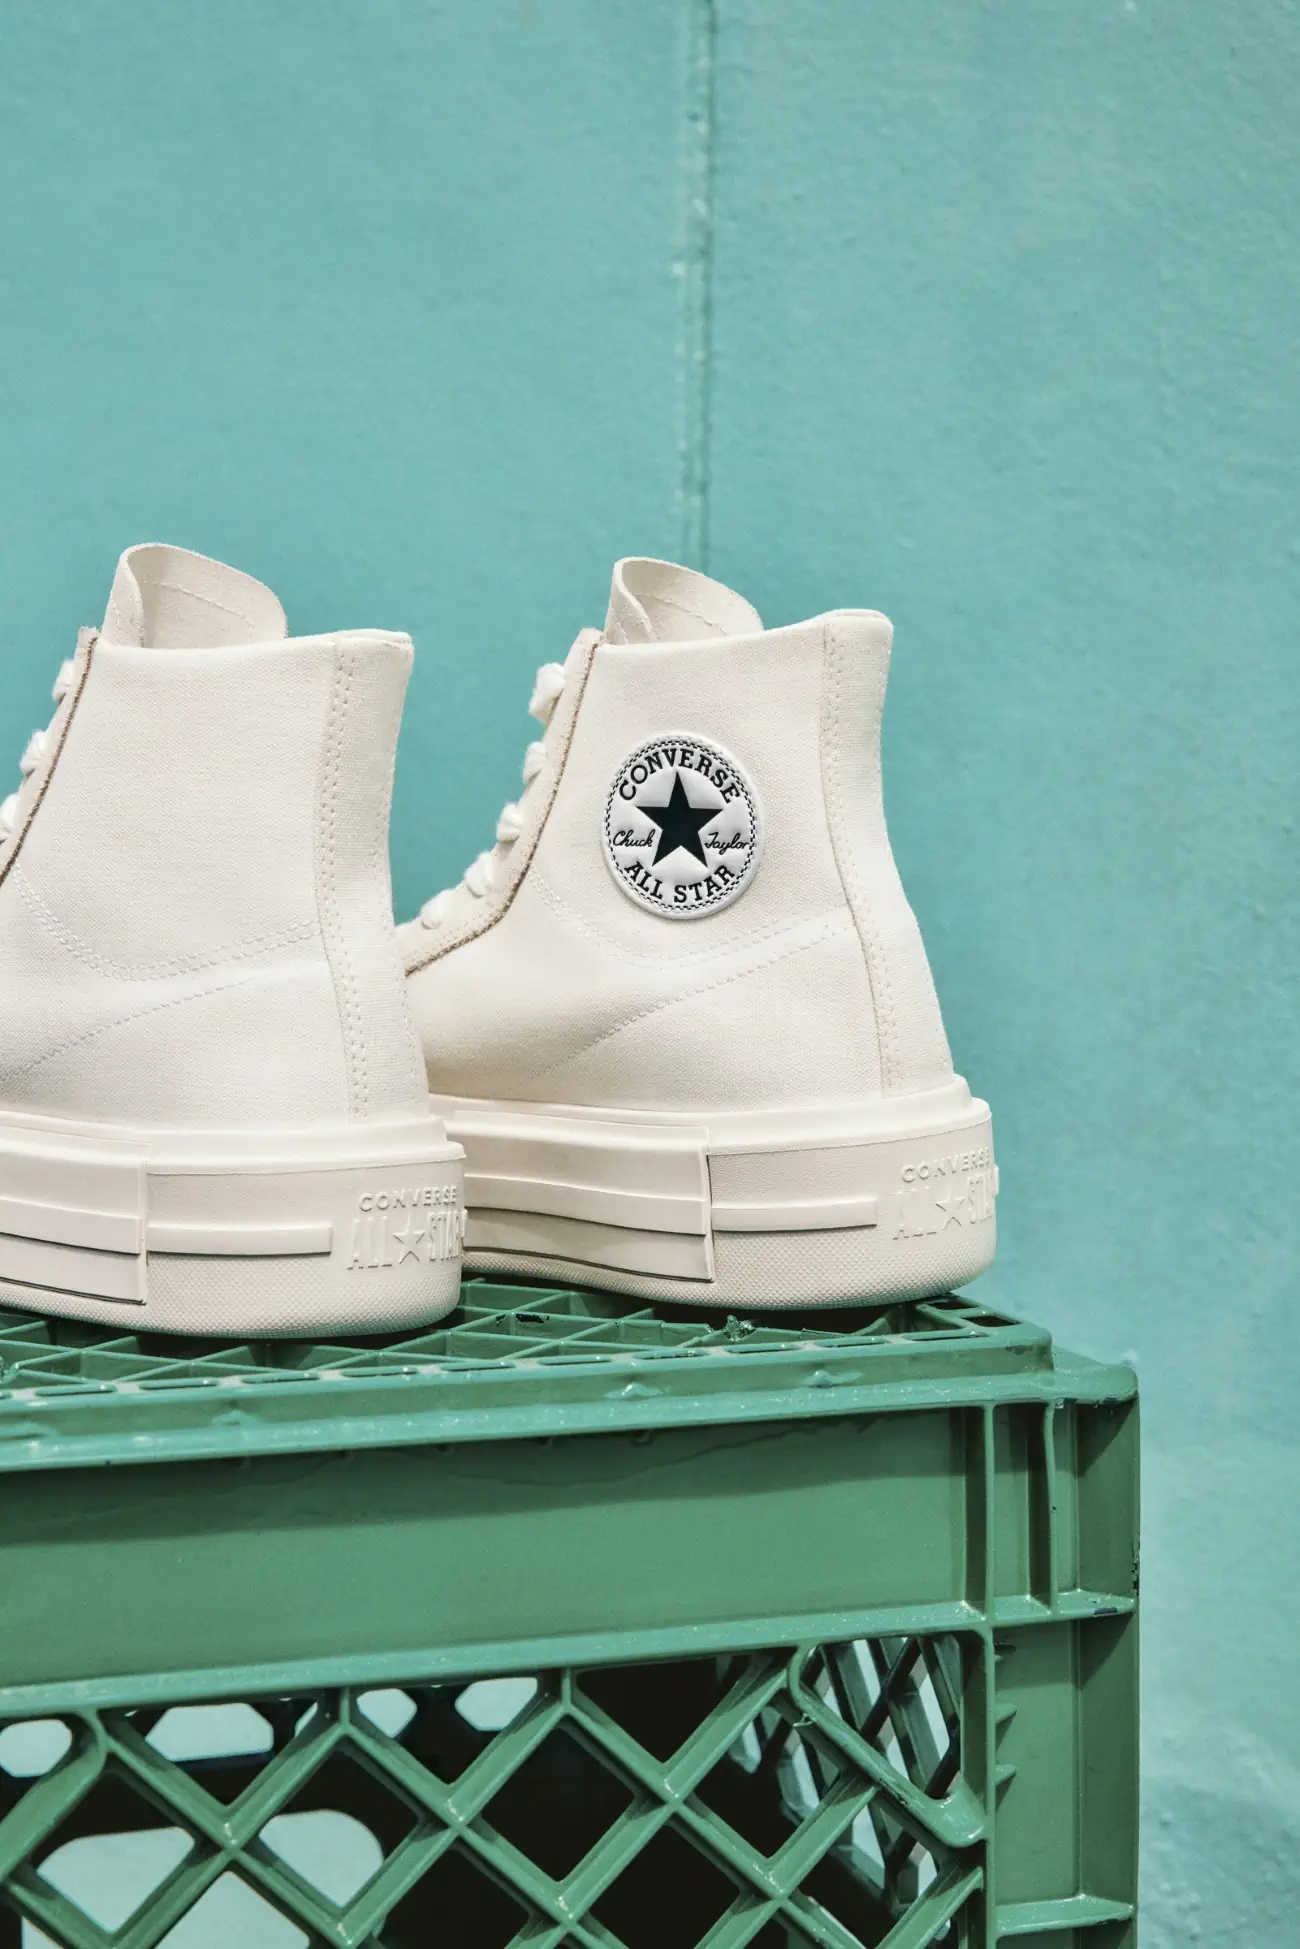 Converse unveils its latest release: Converse Chuck Taylor All Star Cruise